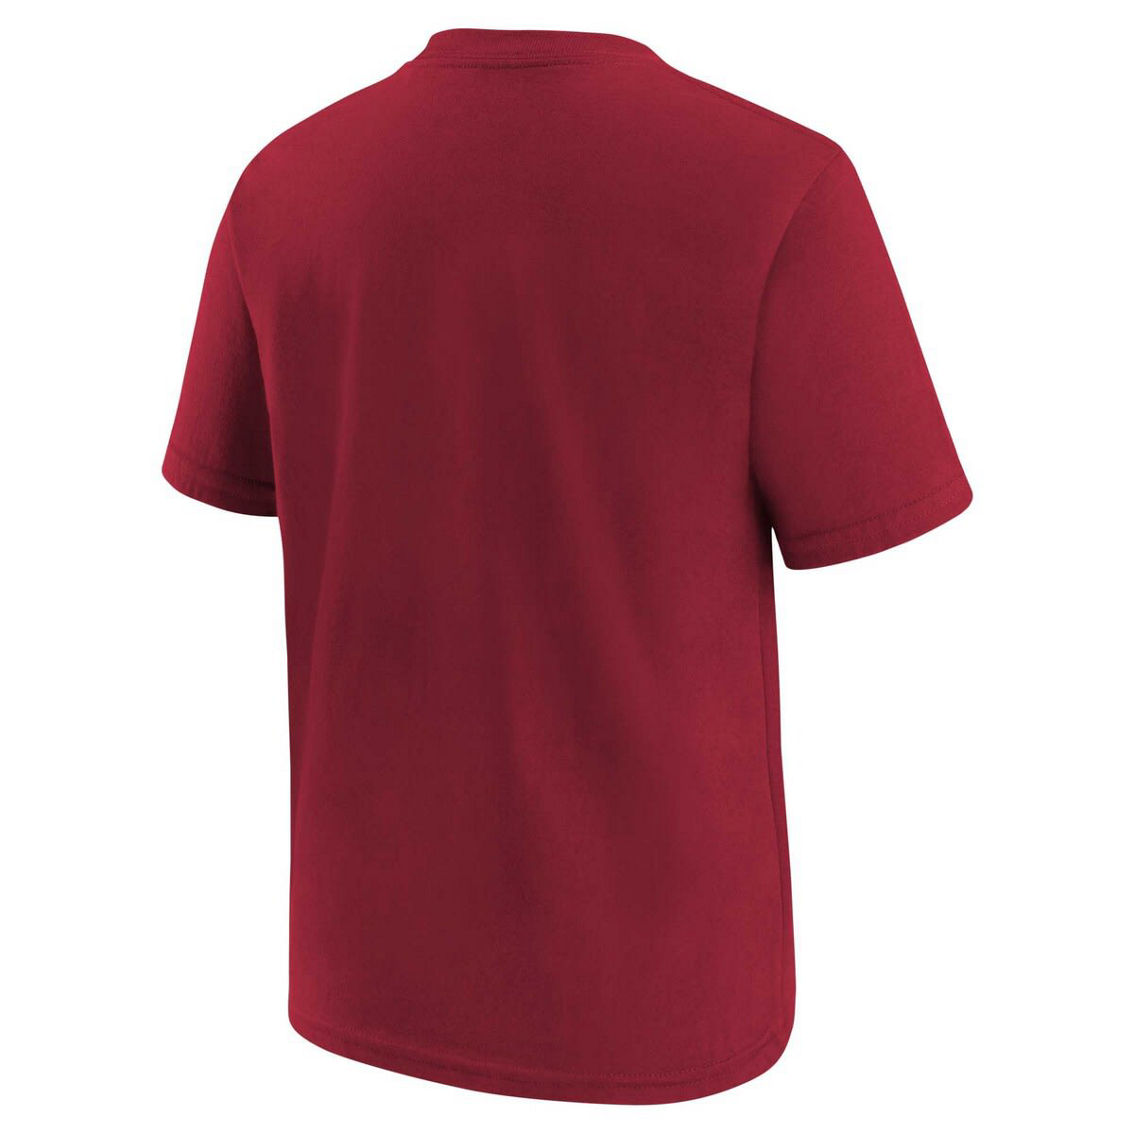 Nike Youth Red Miami Heat Swoosh T-Shirt - Image 4 of 4